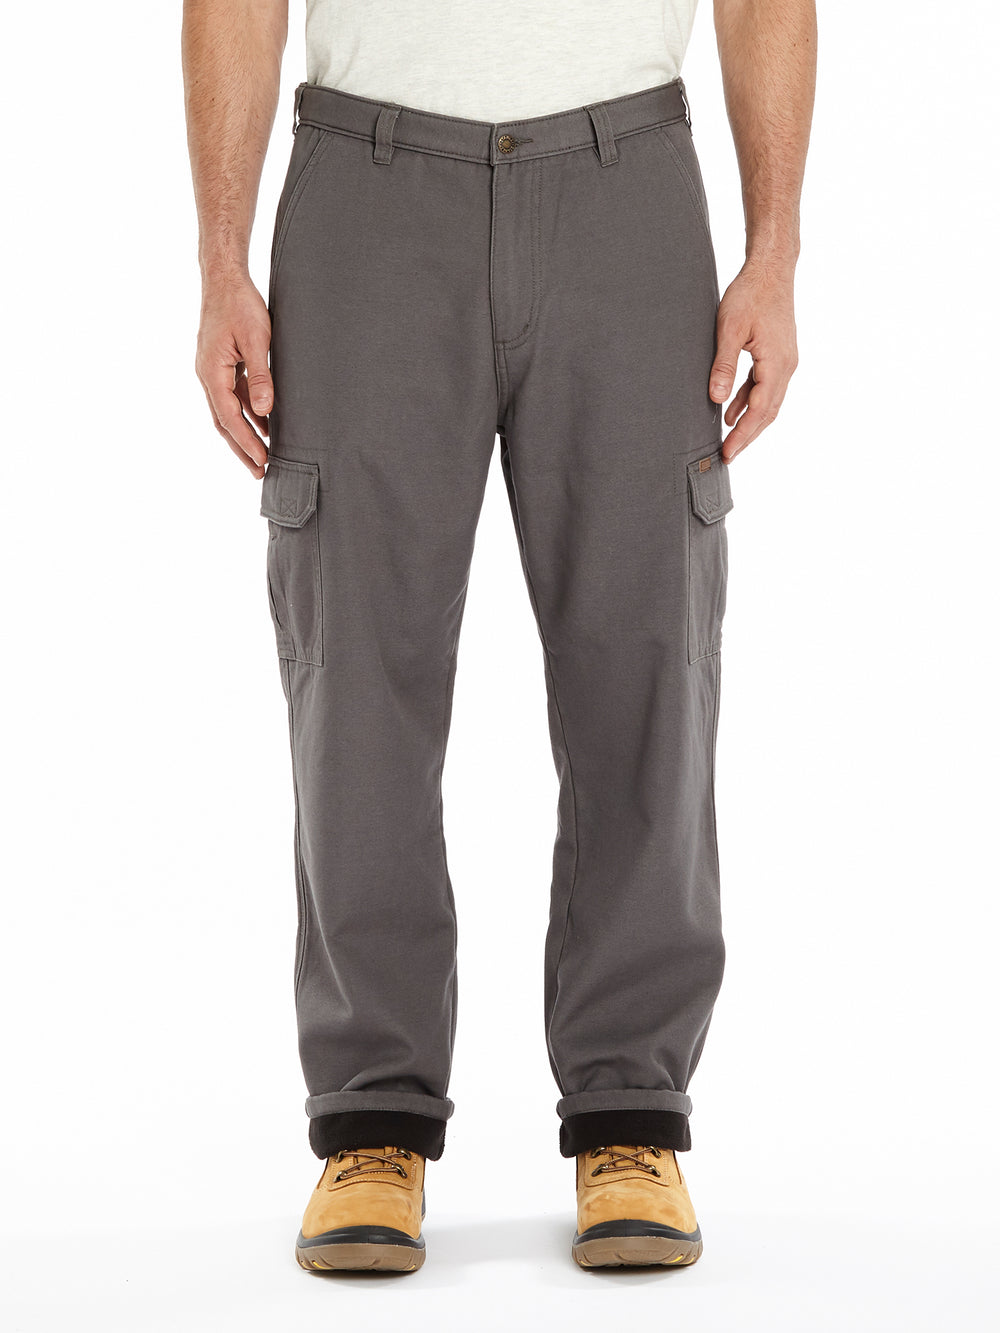 Men's Smith's Workwear Relaxed-Fit Print Fleece-Lined Cargo Canvas